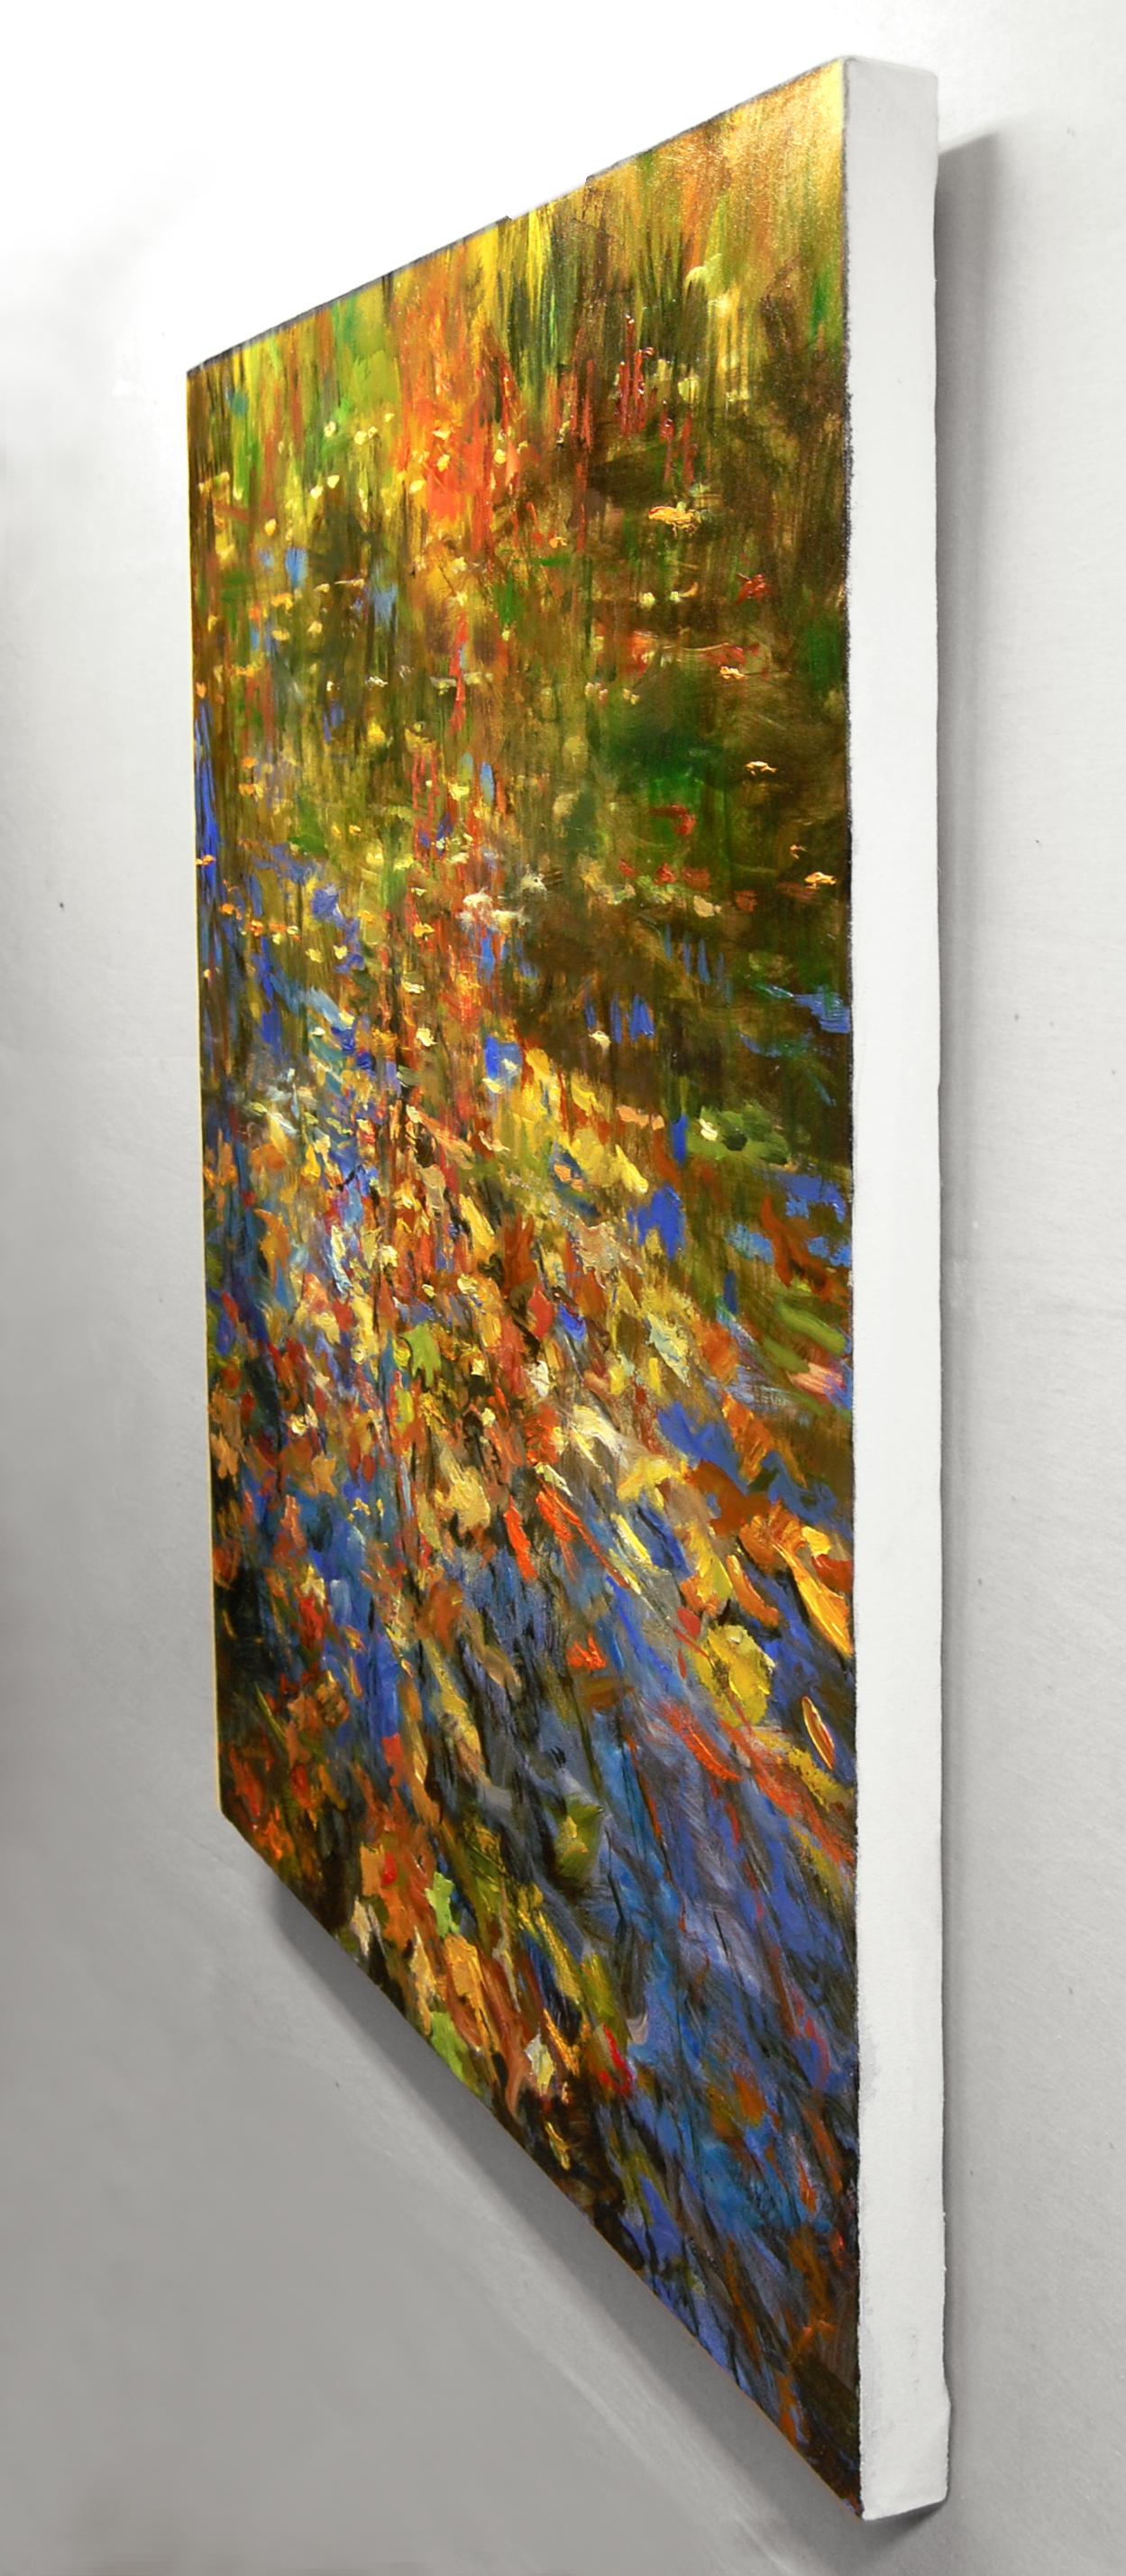 <p>Artist Comments<br>Part of artist Onelio Marrero's series of paintings that explores the colors and reflections of autumn foliage on ponds and lakes. Onelio uses a bold palette and strong, sure strokes to enhance the implied reflections of sky